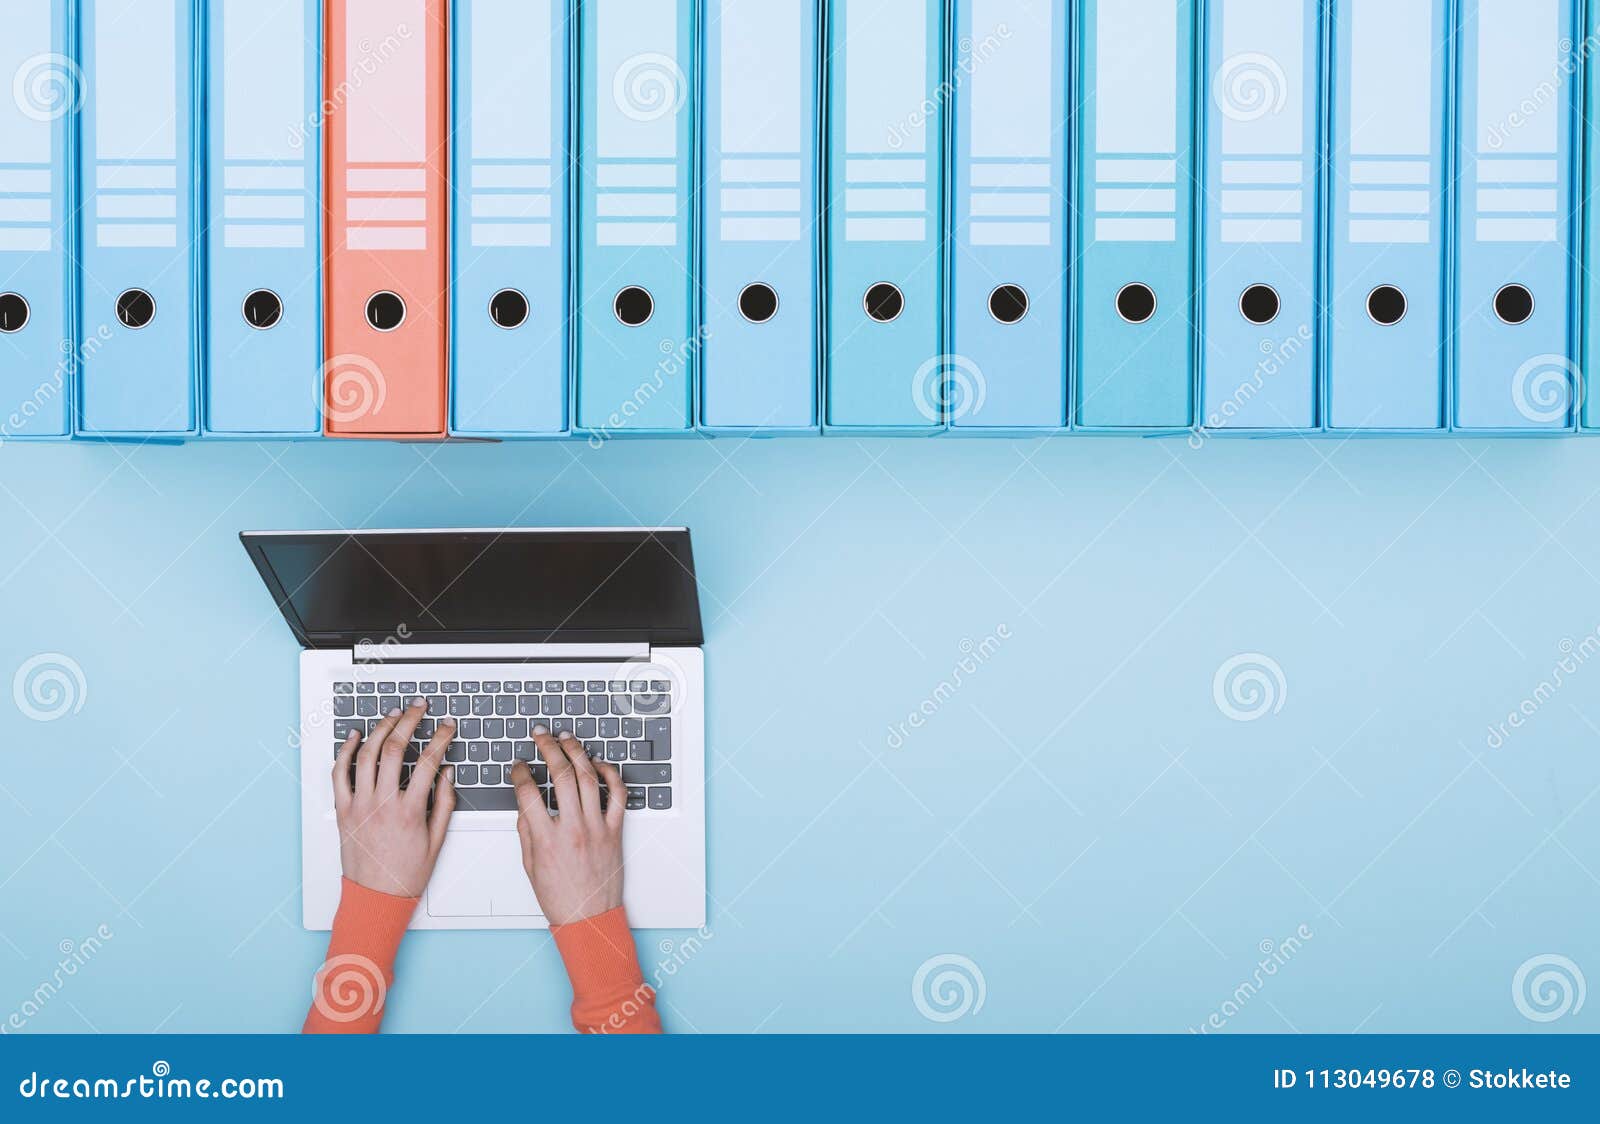 searching files in the archive using a laptop